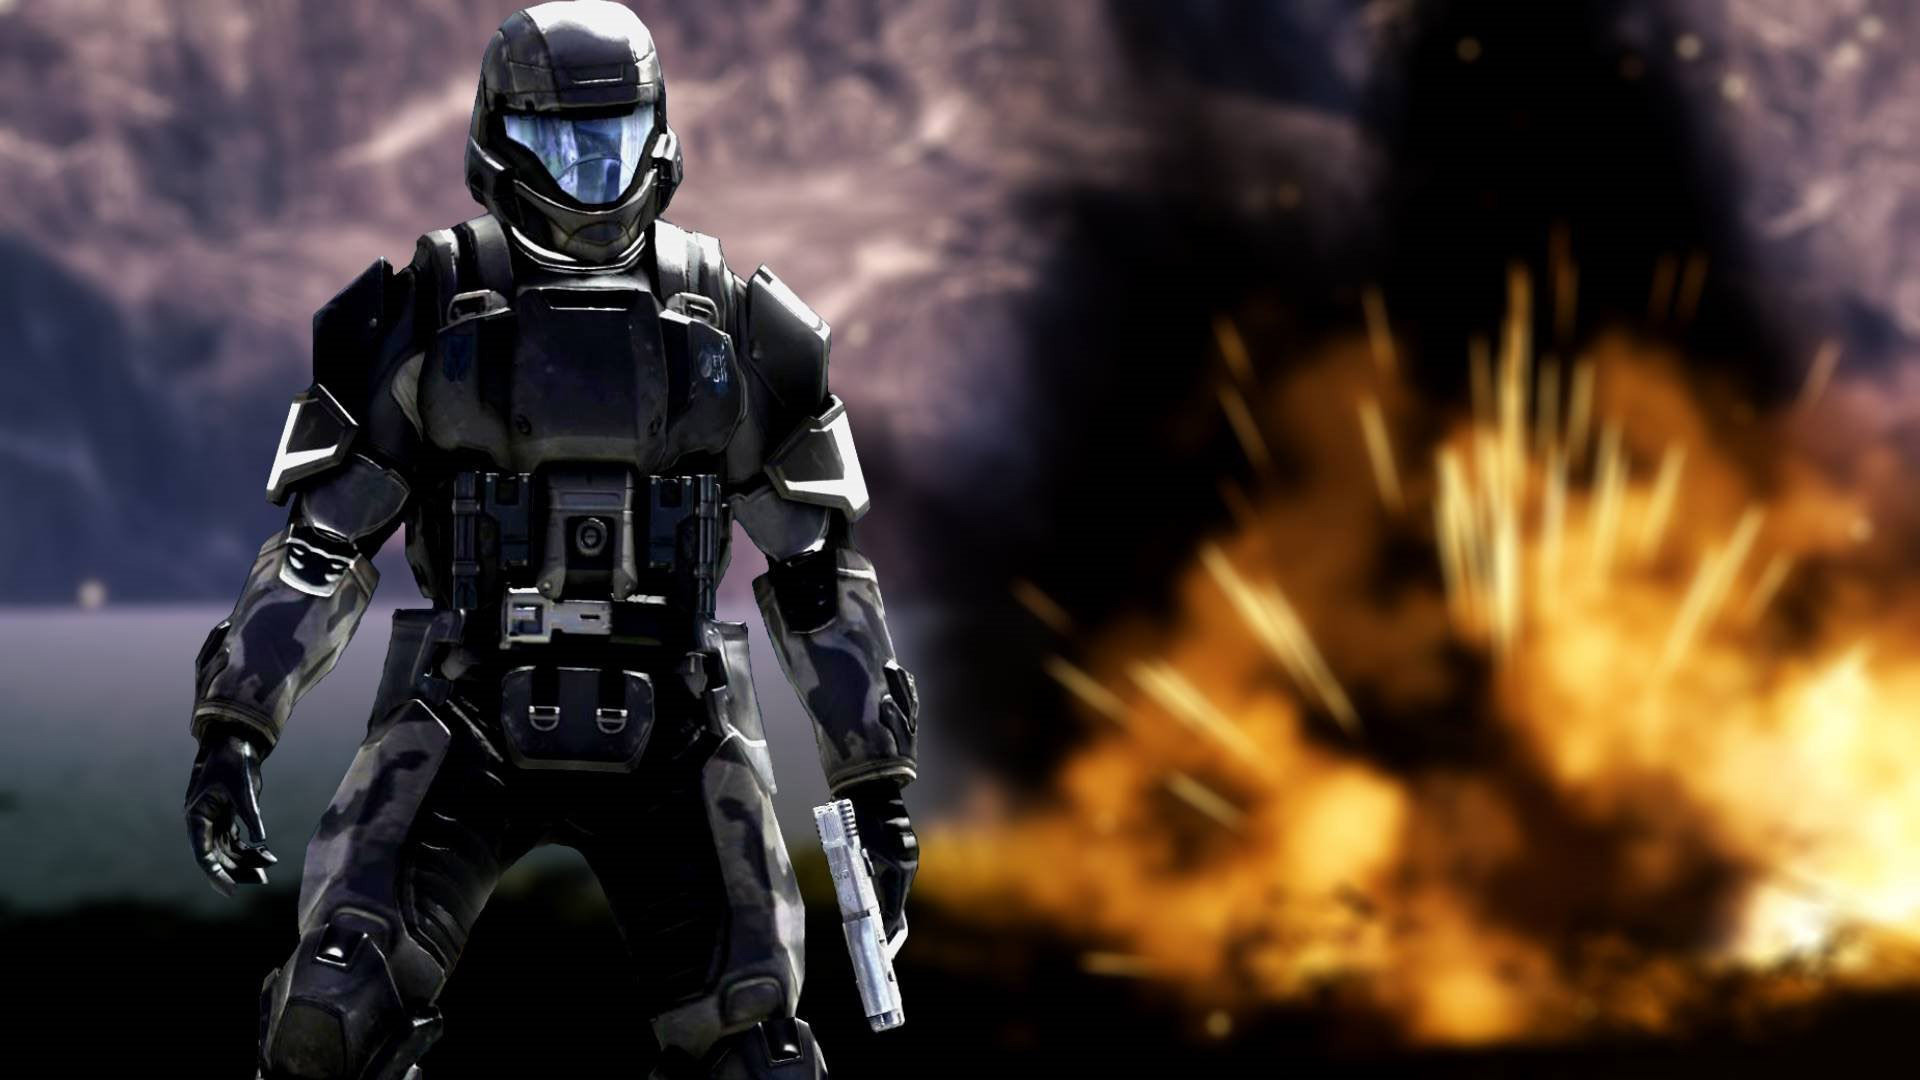 1920x1080  Halo 4 Master Chief Wallpaper High Quality